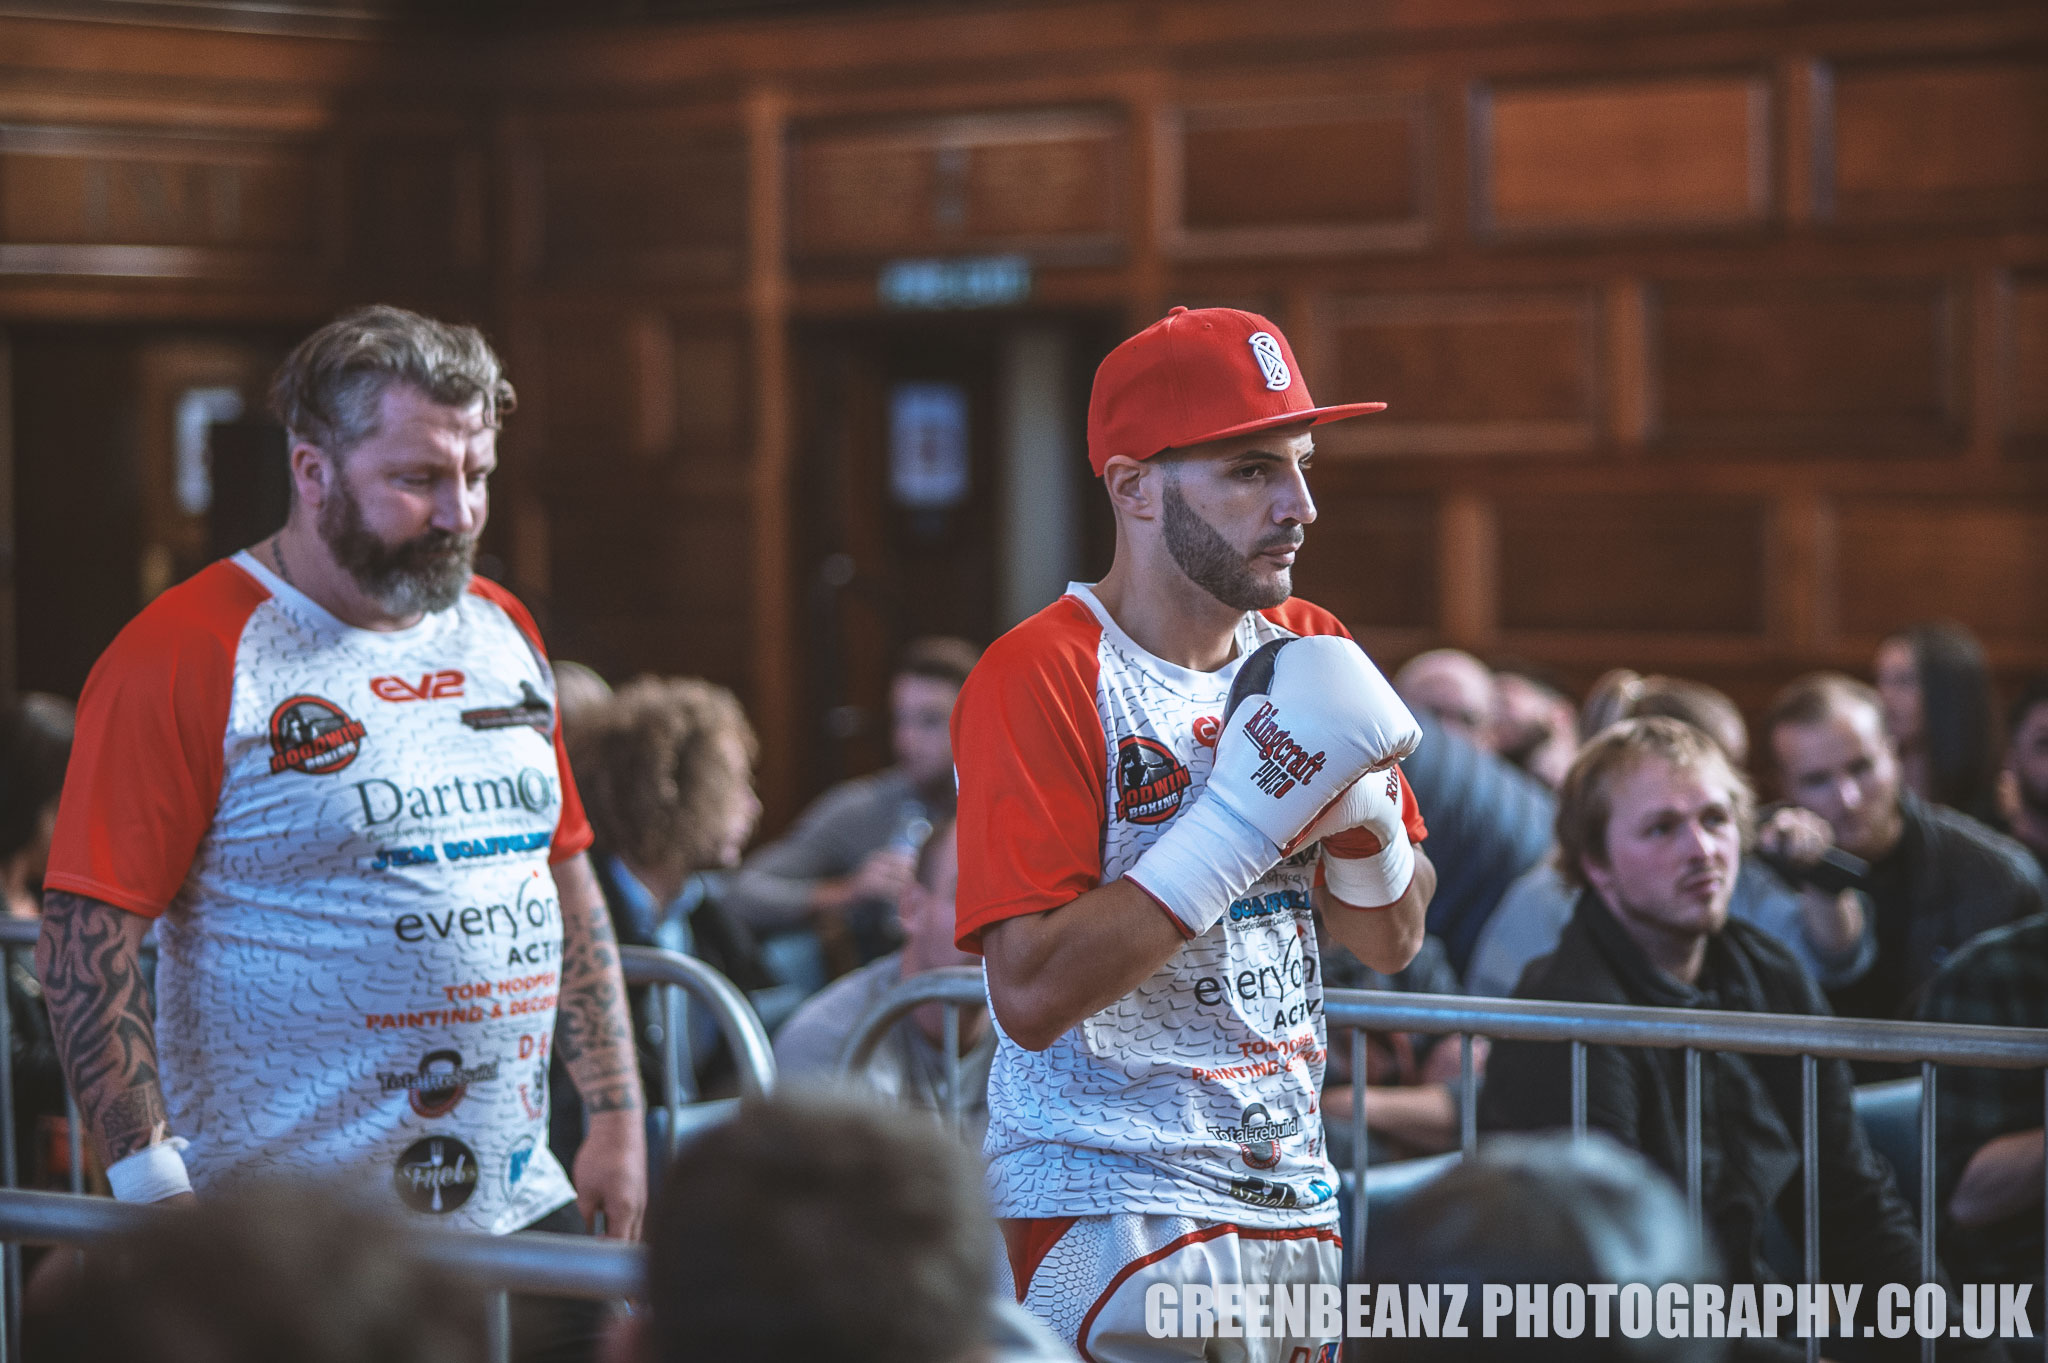 Carl Robson walks Darren Townley to the ring in Plymouth's Historic Guildhall